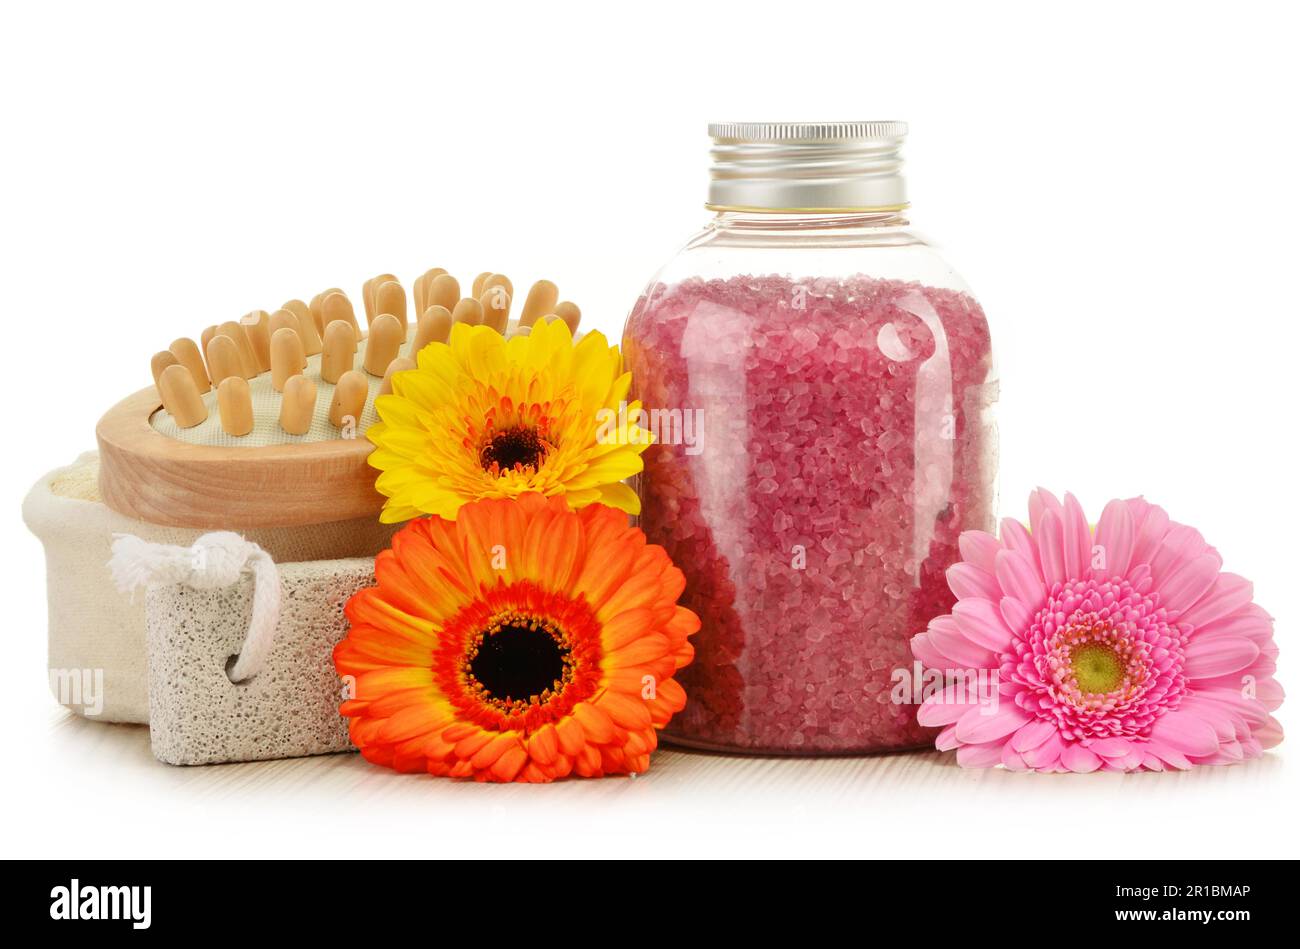 Composition with bottle of bath salt and other products Stock Photo